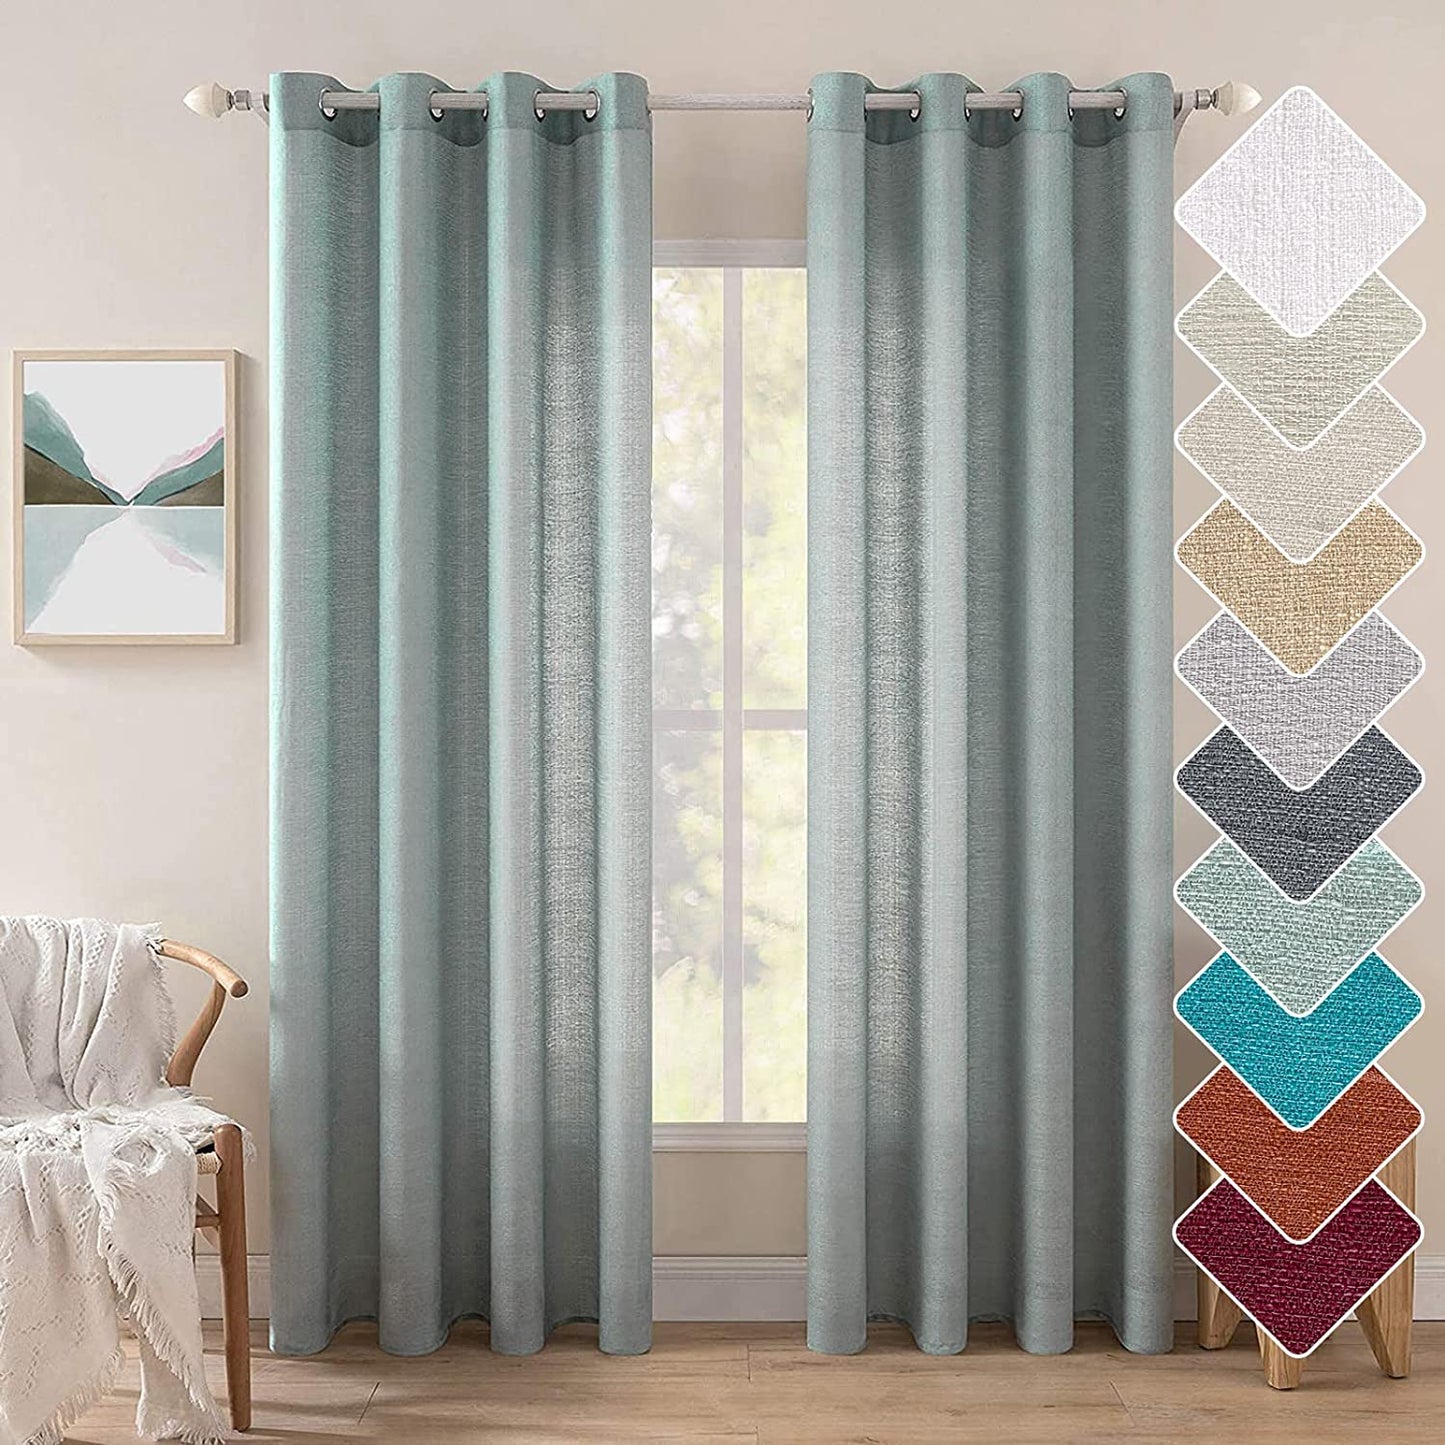 MIULEE Burnt Orange Linen Semi Sheer Curtains 2 Panels for Living Room Bedroom Linen Textured Light Filtering Privacy Window Curtains Terracotta Grommet Drapes Rust Boho Fall Decor W 52 X L 84 Inches  MIULEE Grommet | Teal Green W52 X L84 